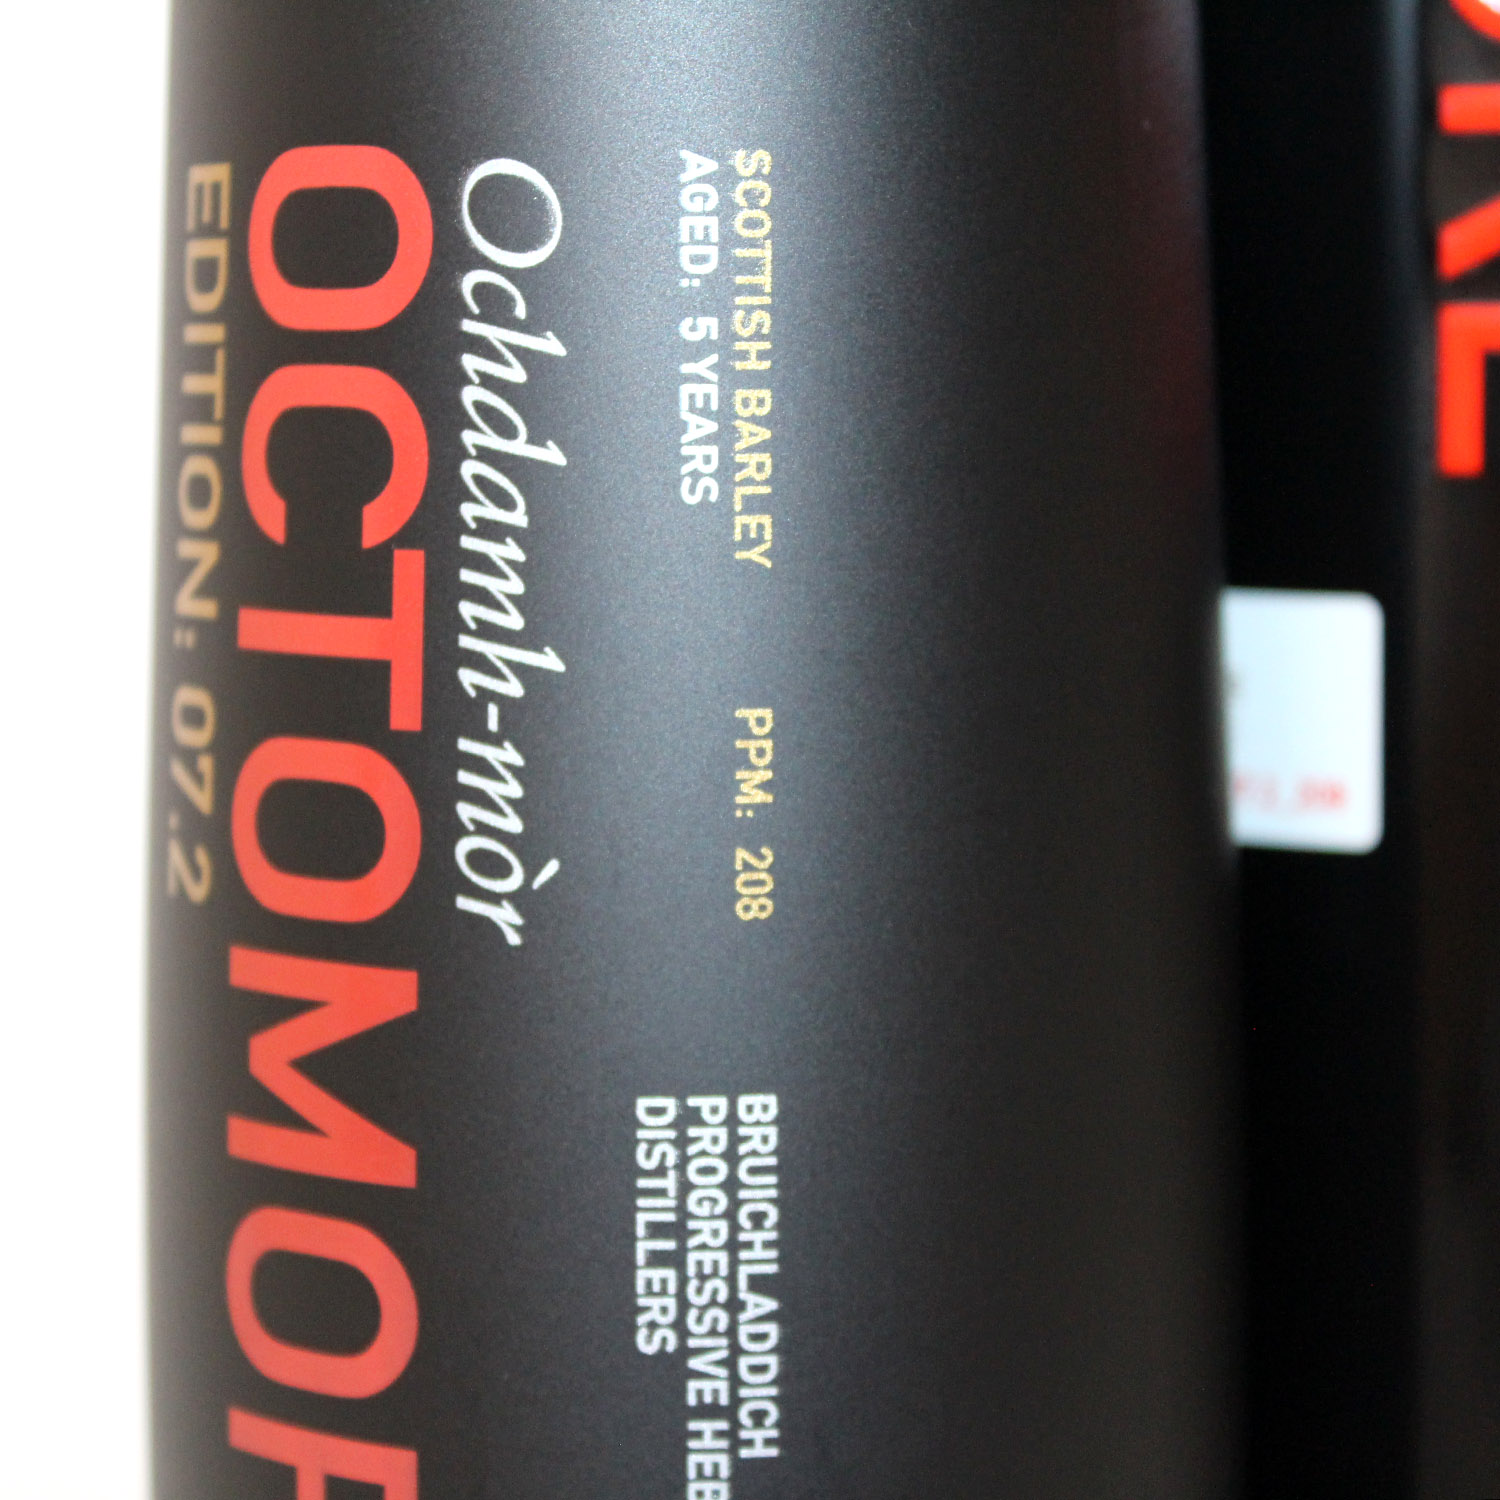 Bruichladdich Octomore 07.2 Travel Retail Exclusive 208 PPM